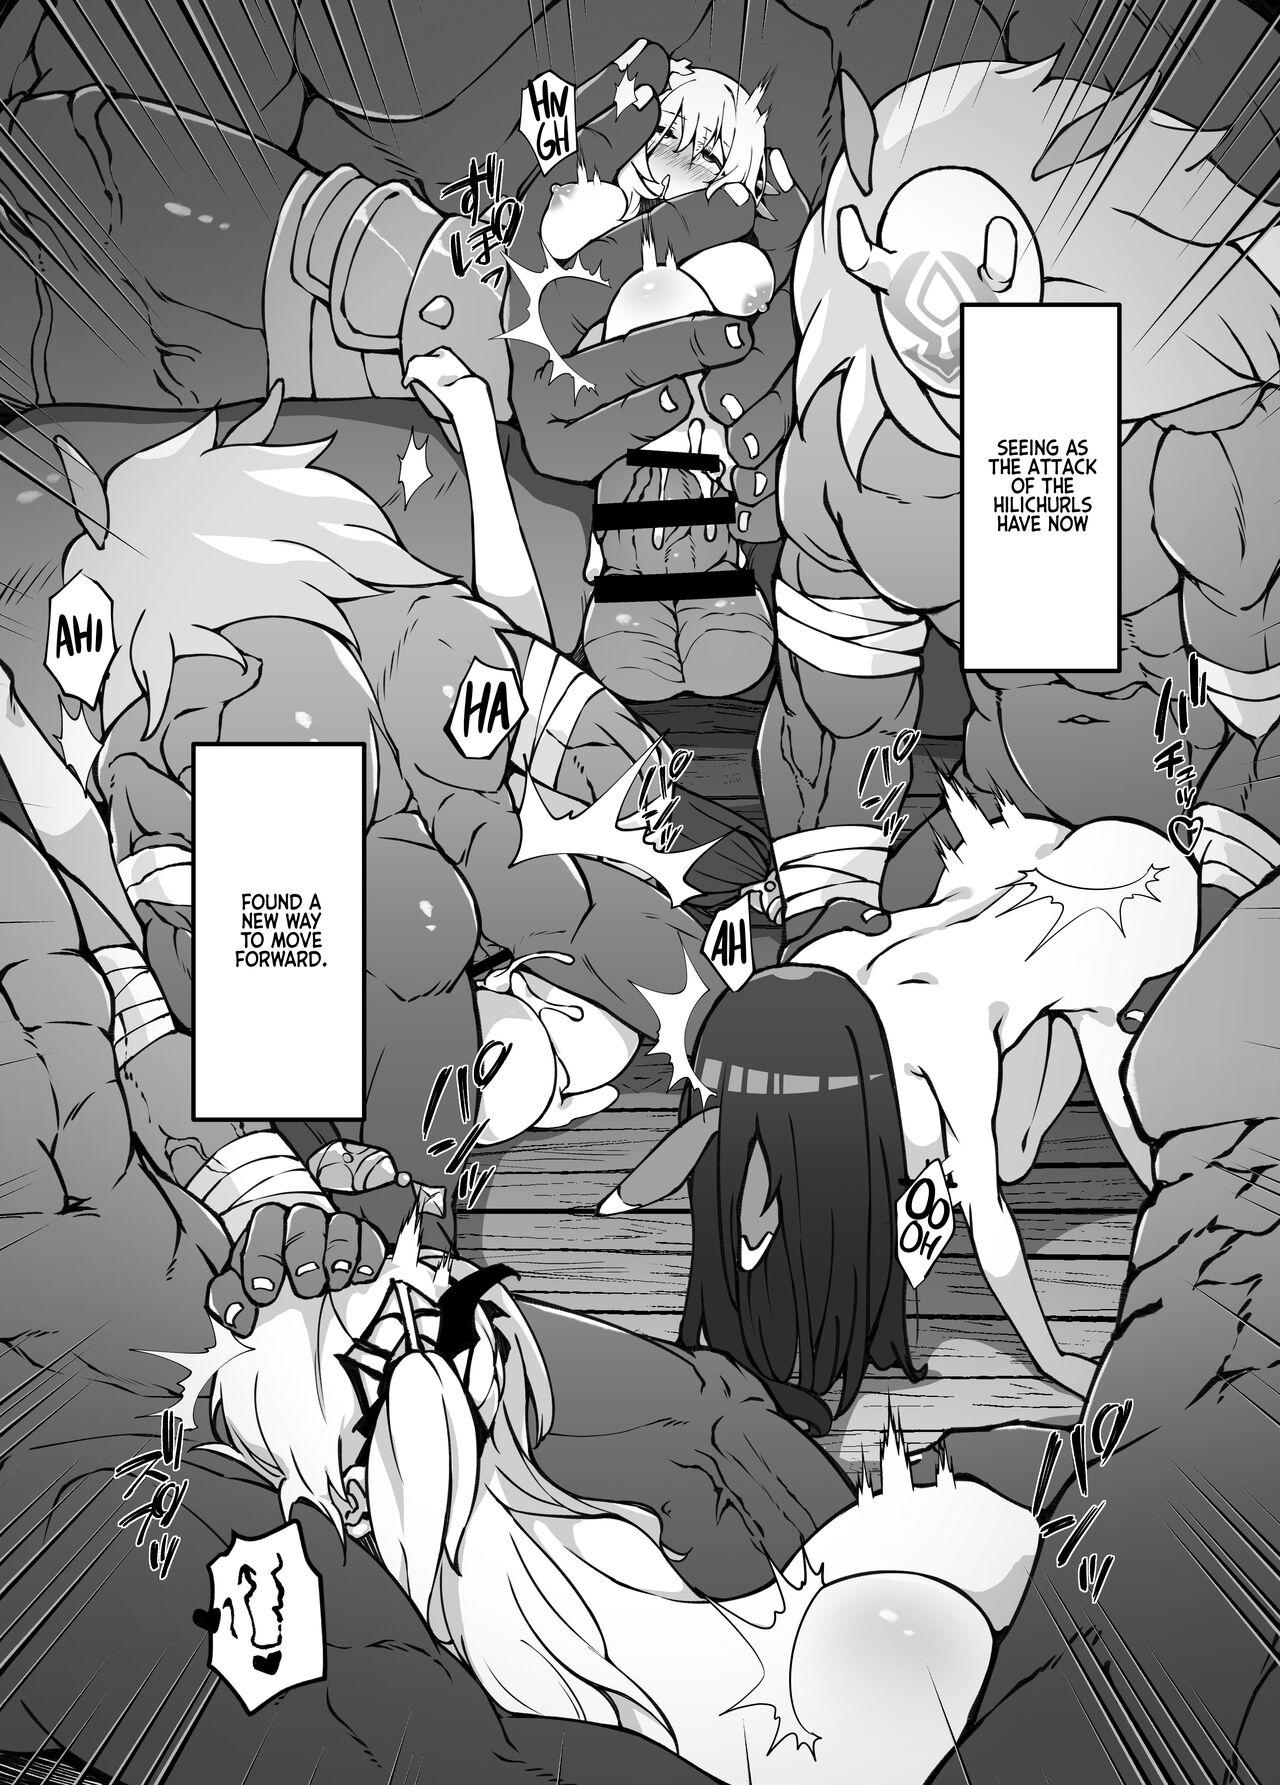 Menage [Karouke (Karou)] The Attack of the Hilichurls II ~The Invasion's Prelude~ Noelle,Chivalric Blossom that withered~ (Genshin Impact) [English] [Kyuume] [Digital] - Genshin impact Free Blow Job - Page 8